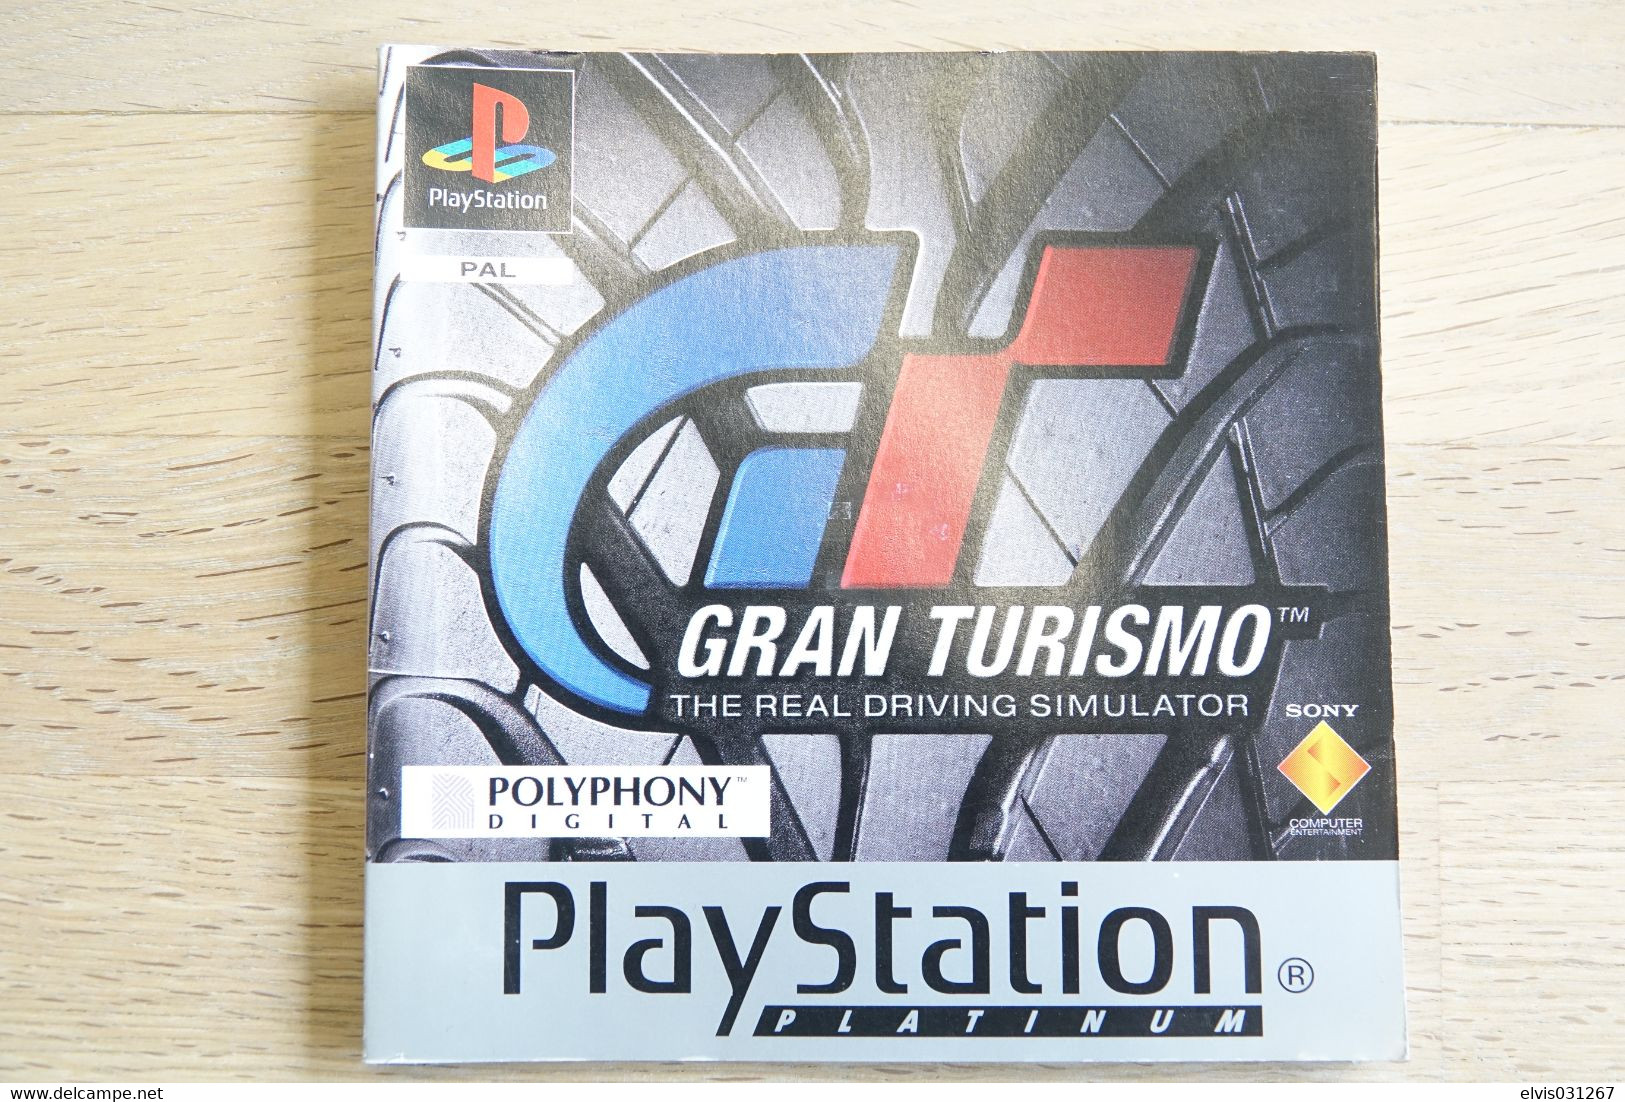 SONY PLAYSTATION ONE PS1 : MANUAL : GRAN TURISMO THE REAL DRIVING SIMULATOR PLATINUM - PAL - Literature & Instructions